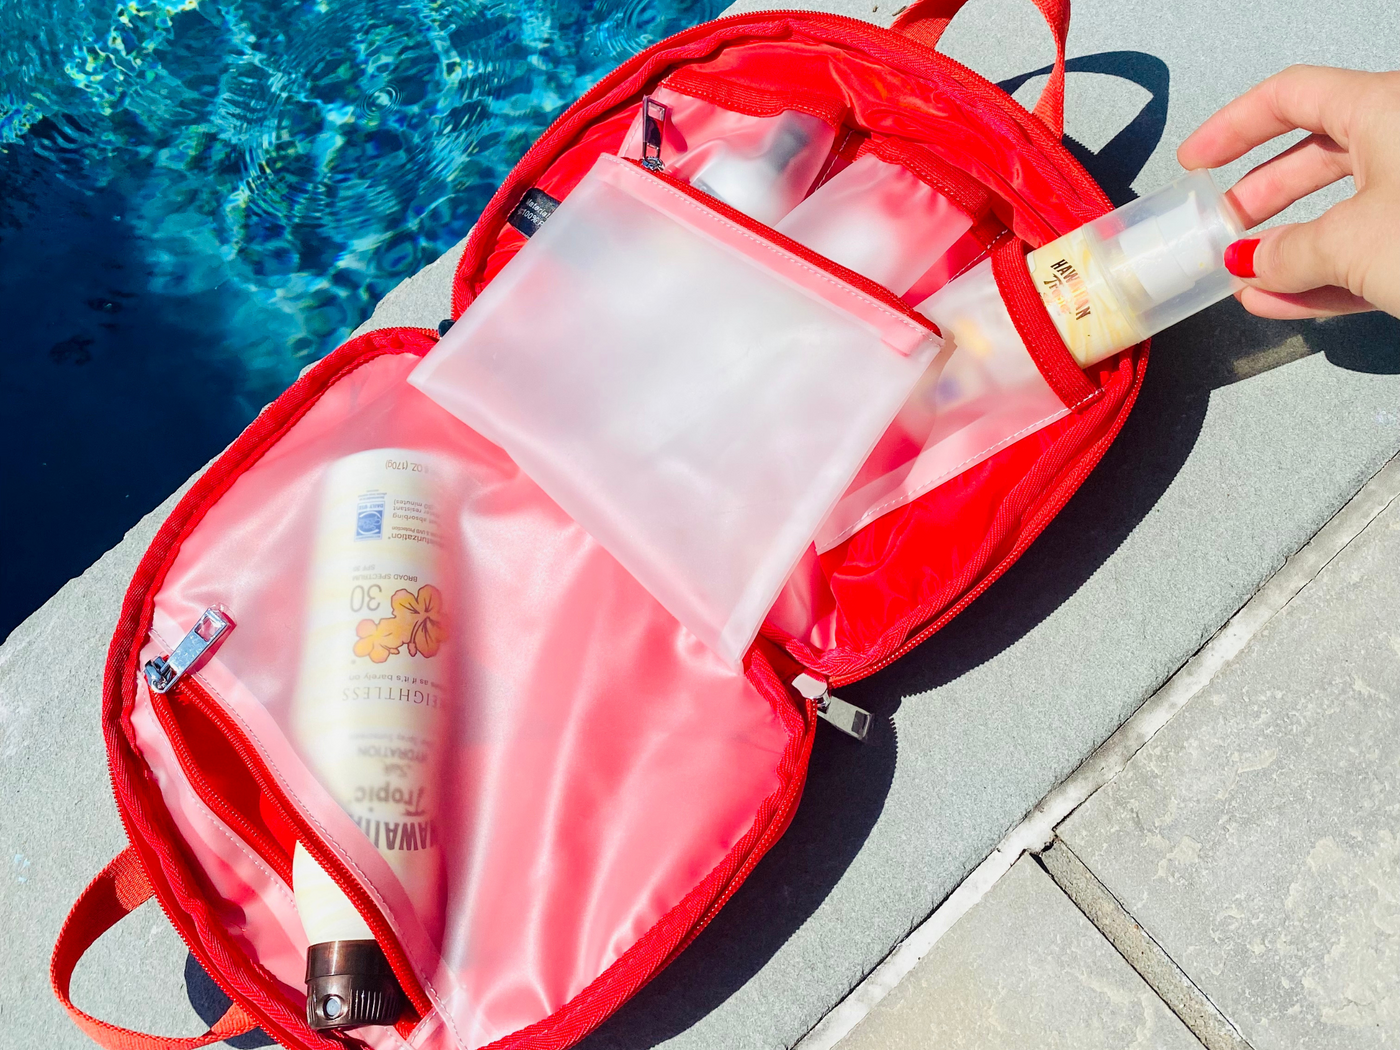 Red toiletry case packed up with SPF for a day at the pool #color_cherry-red